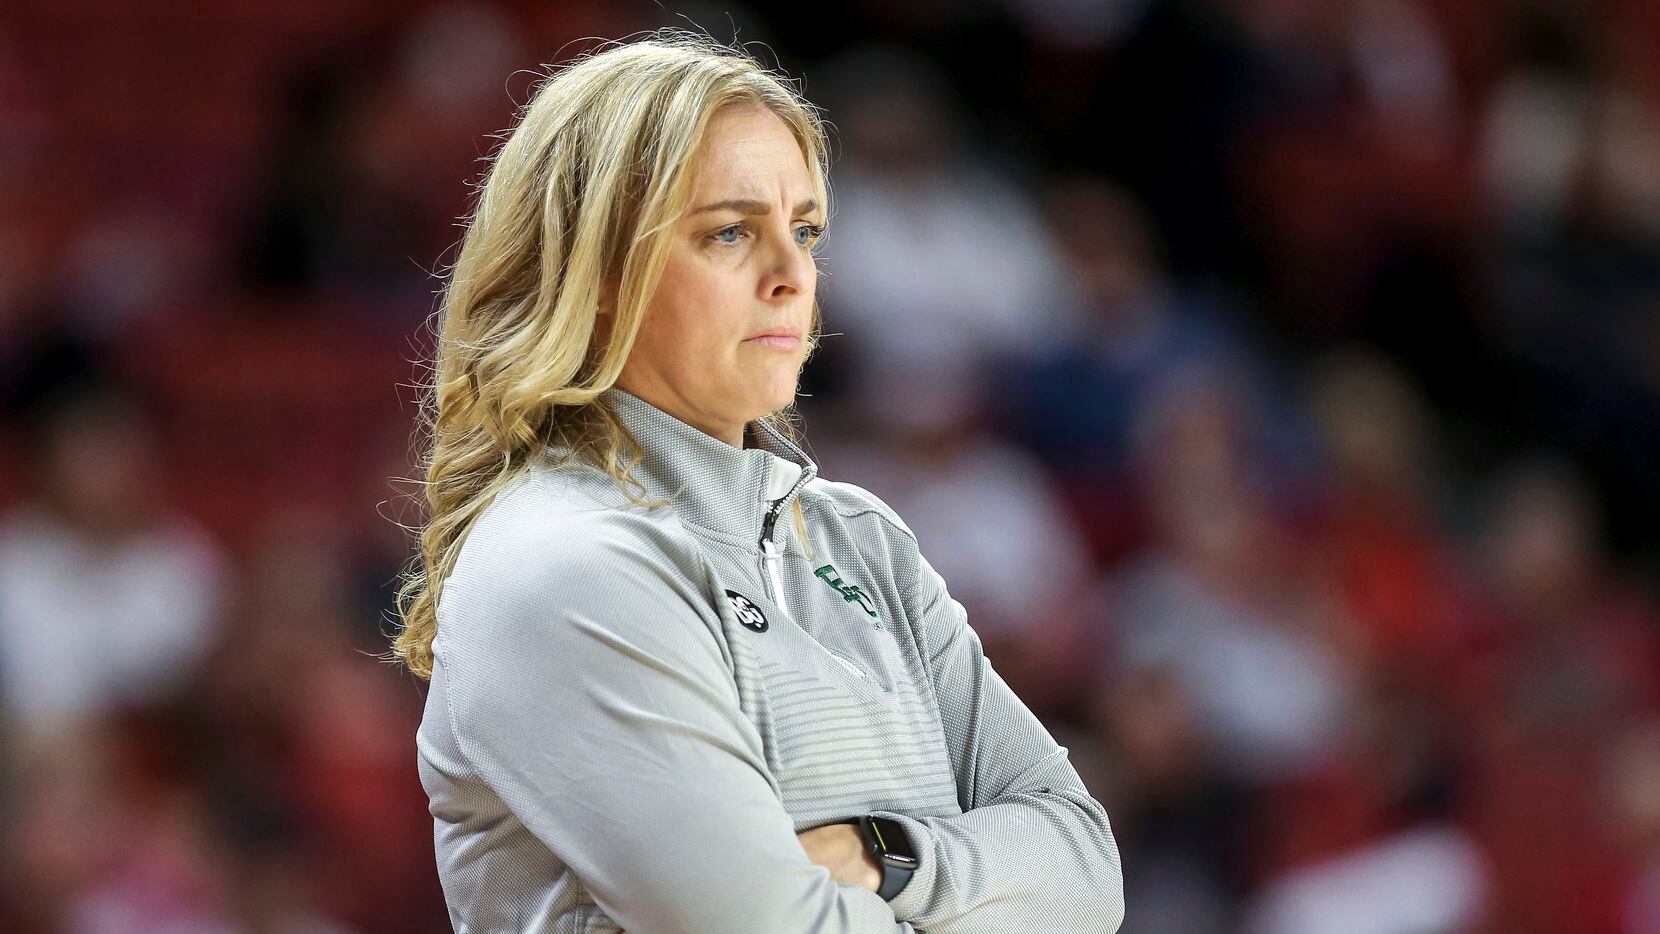 Baylor women's basketball falls out of AP Top 25 poll, first time since 2004